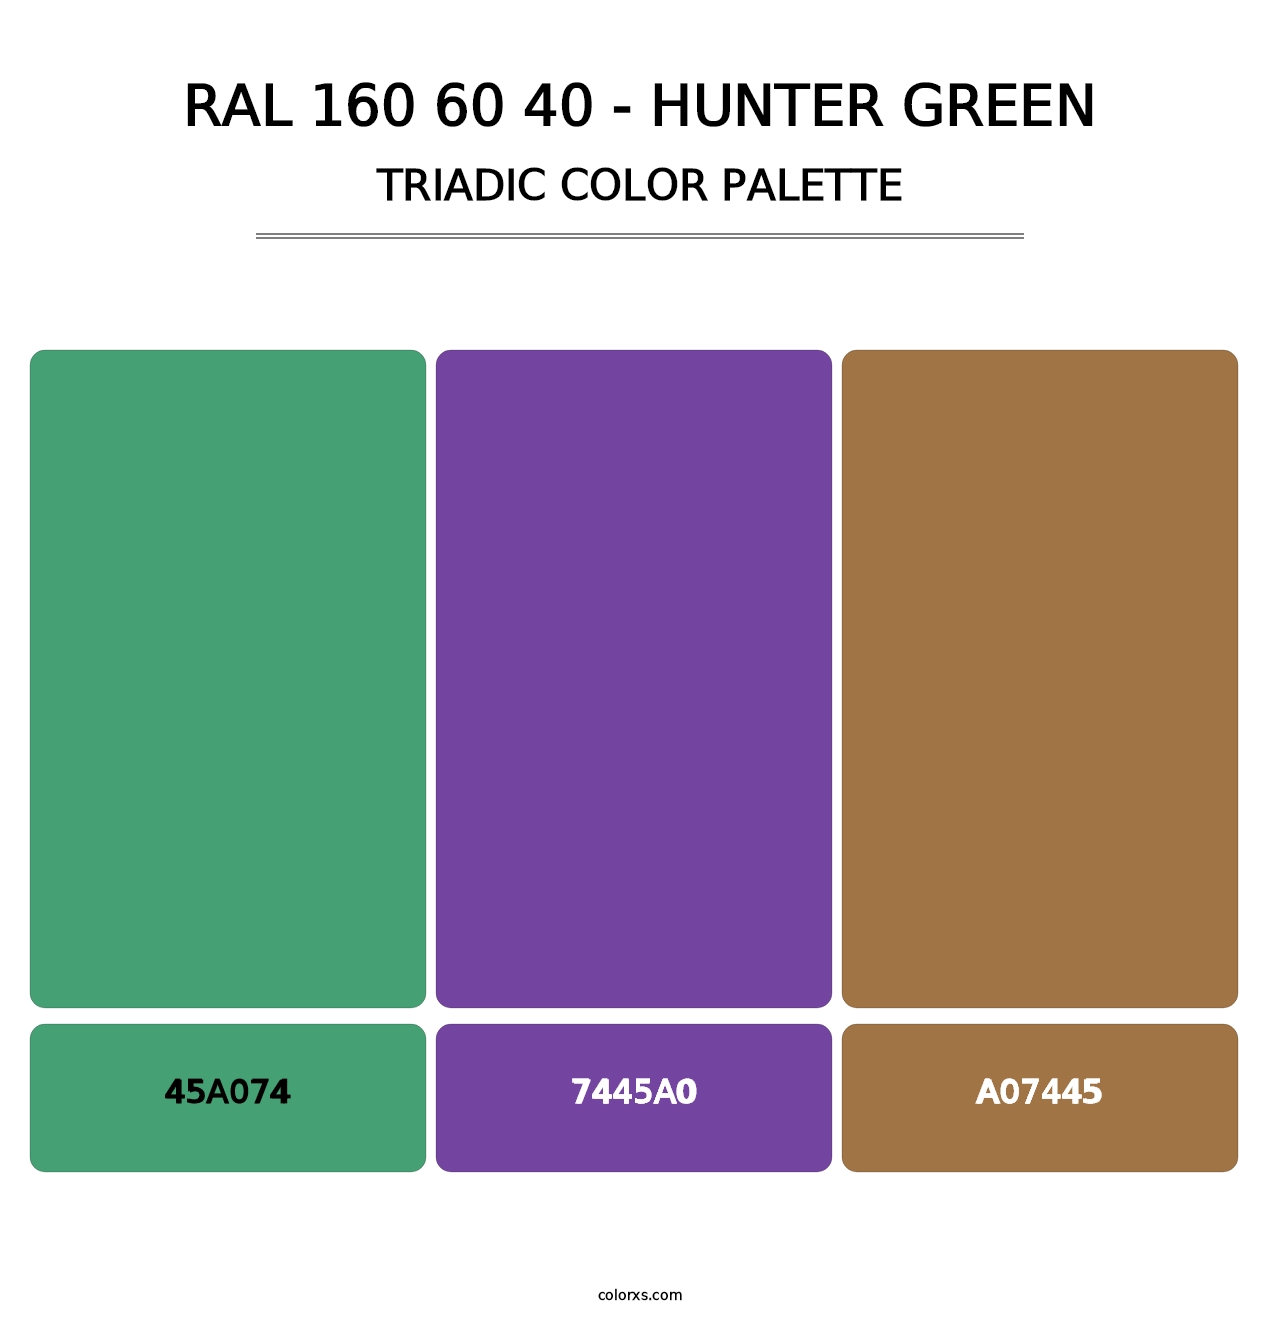 RAL 160 60 40 - Hunter Green - Triadic Color Palette